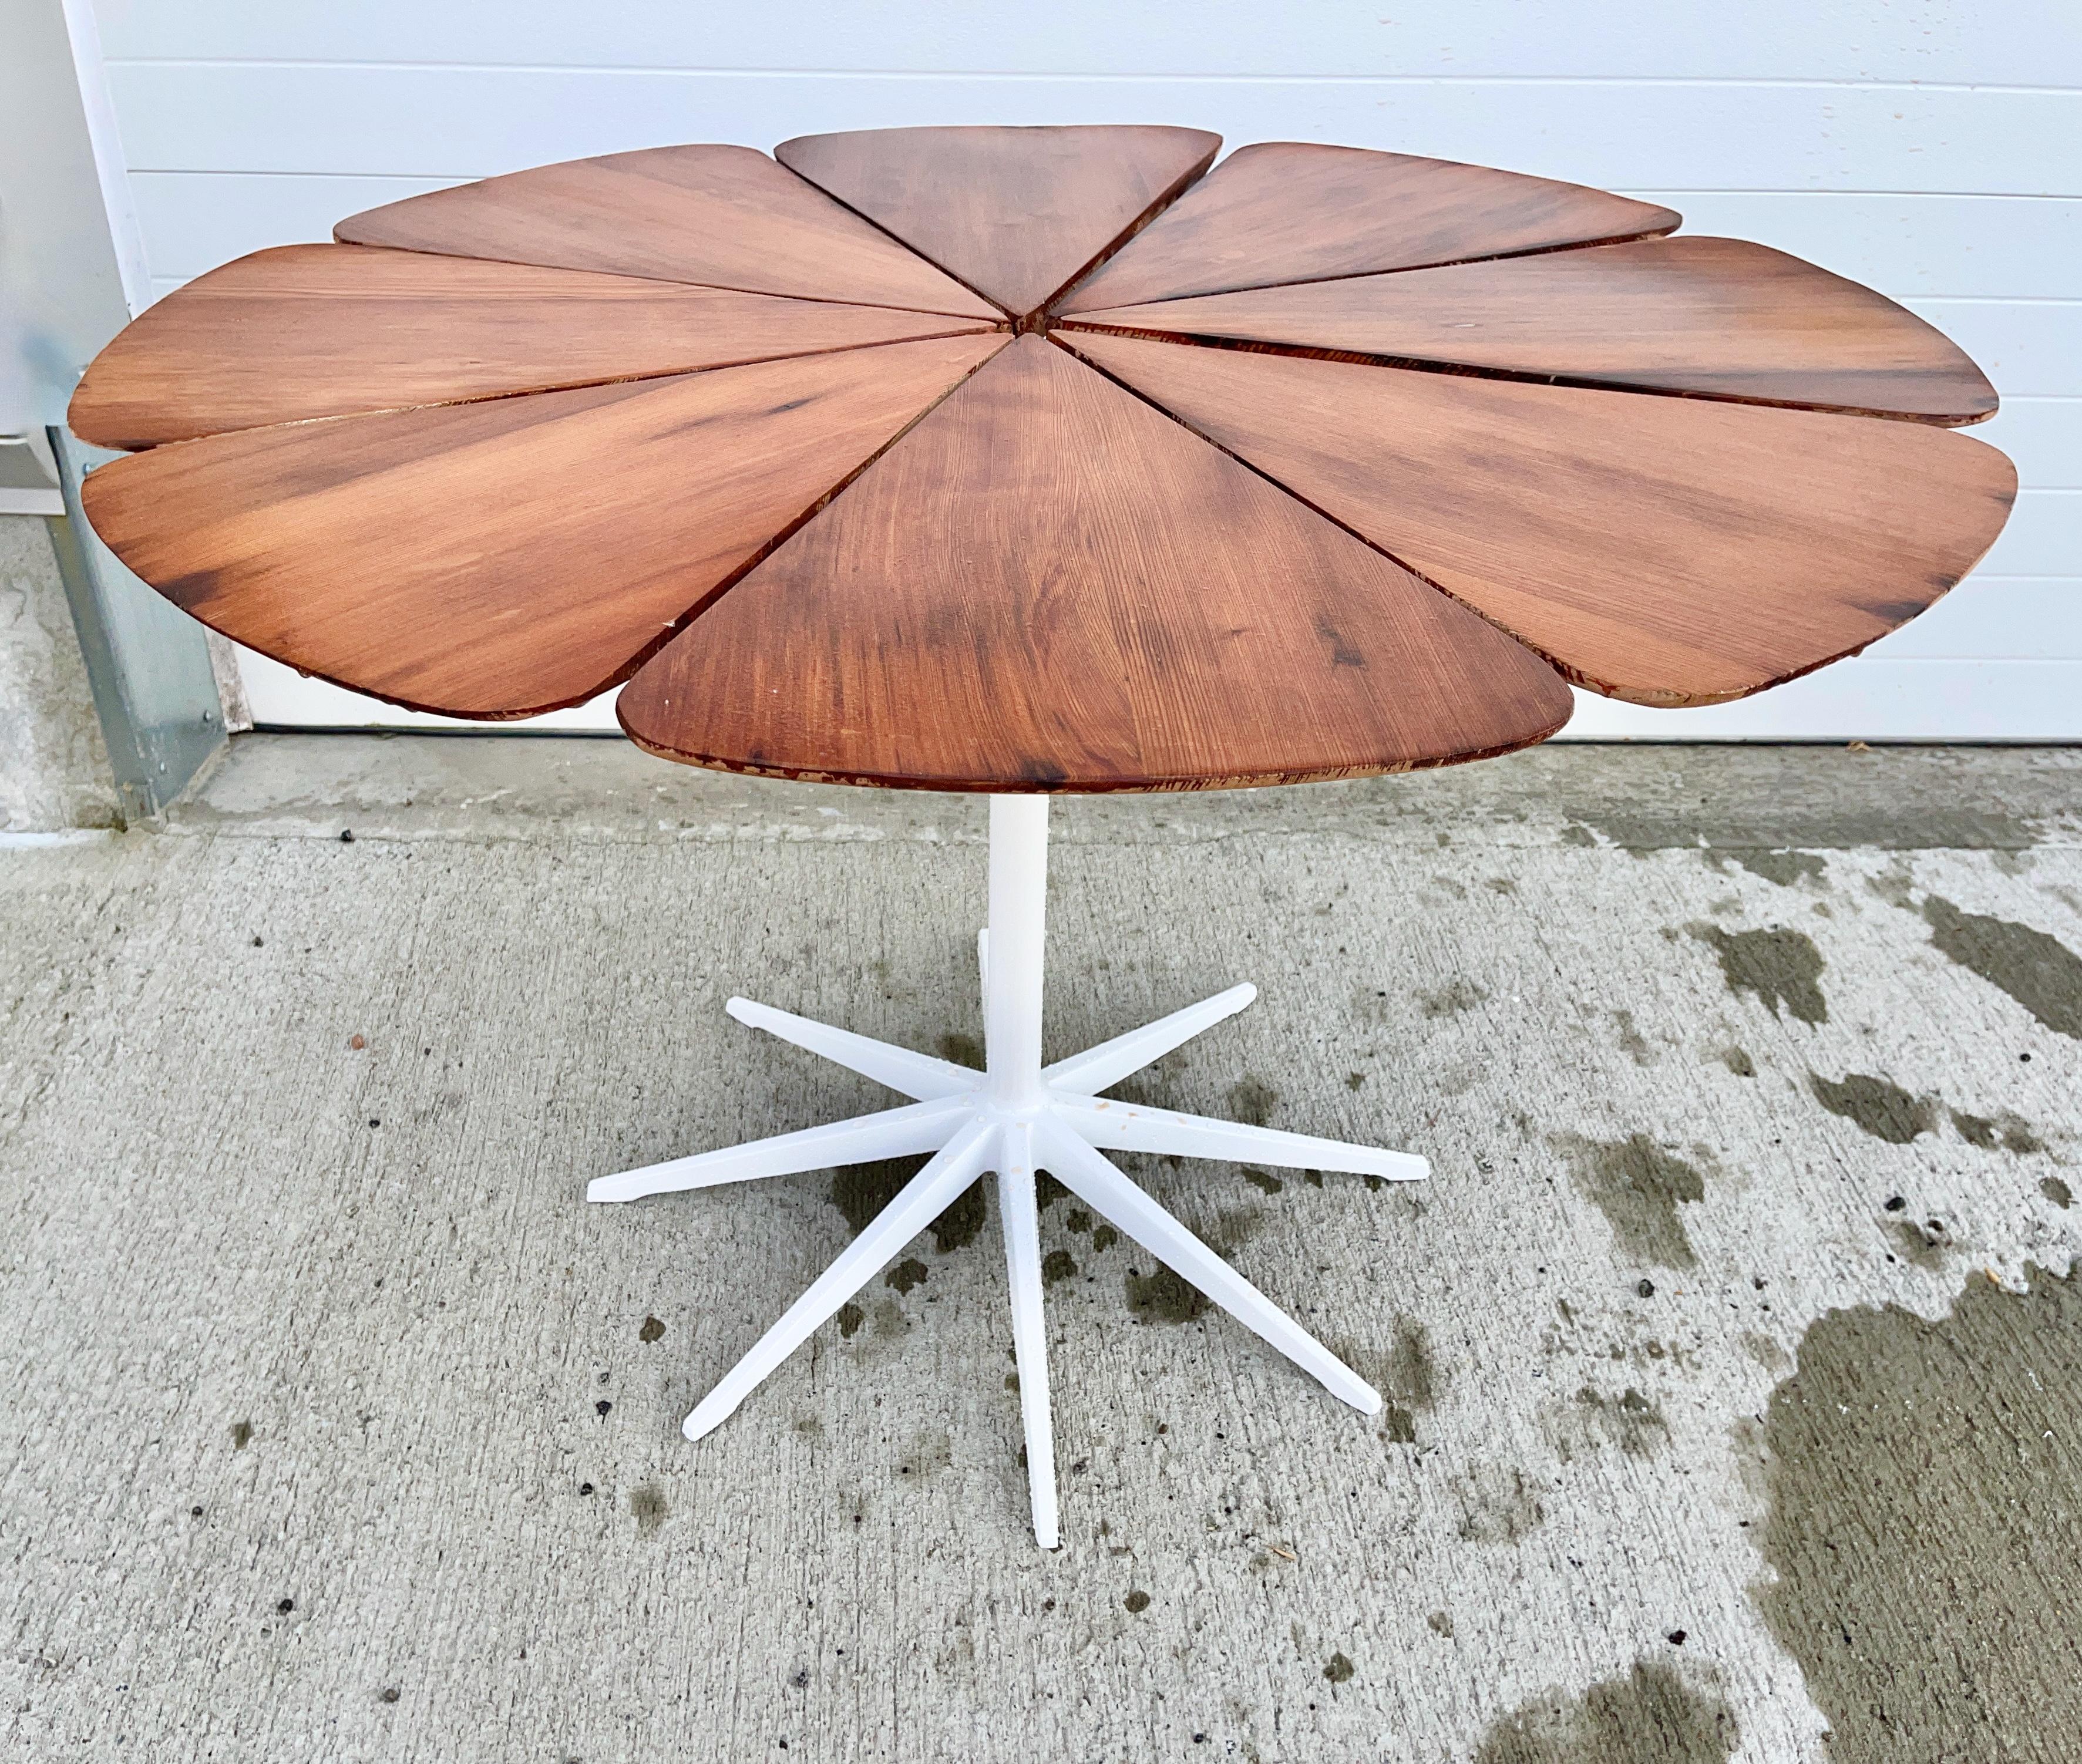 1961 Petal Dining Table by Richard Schultz for Knoll in California Redwood For Sale 4